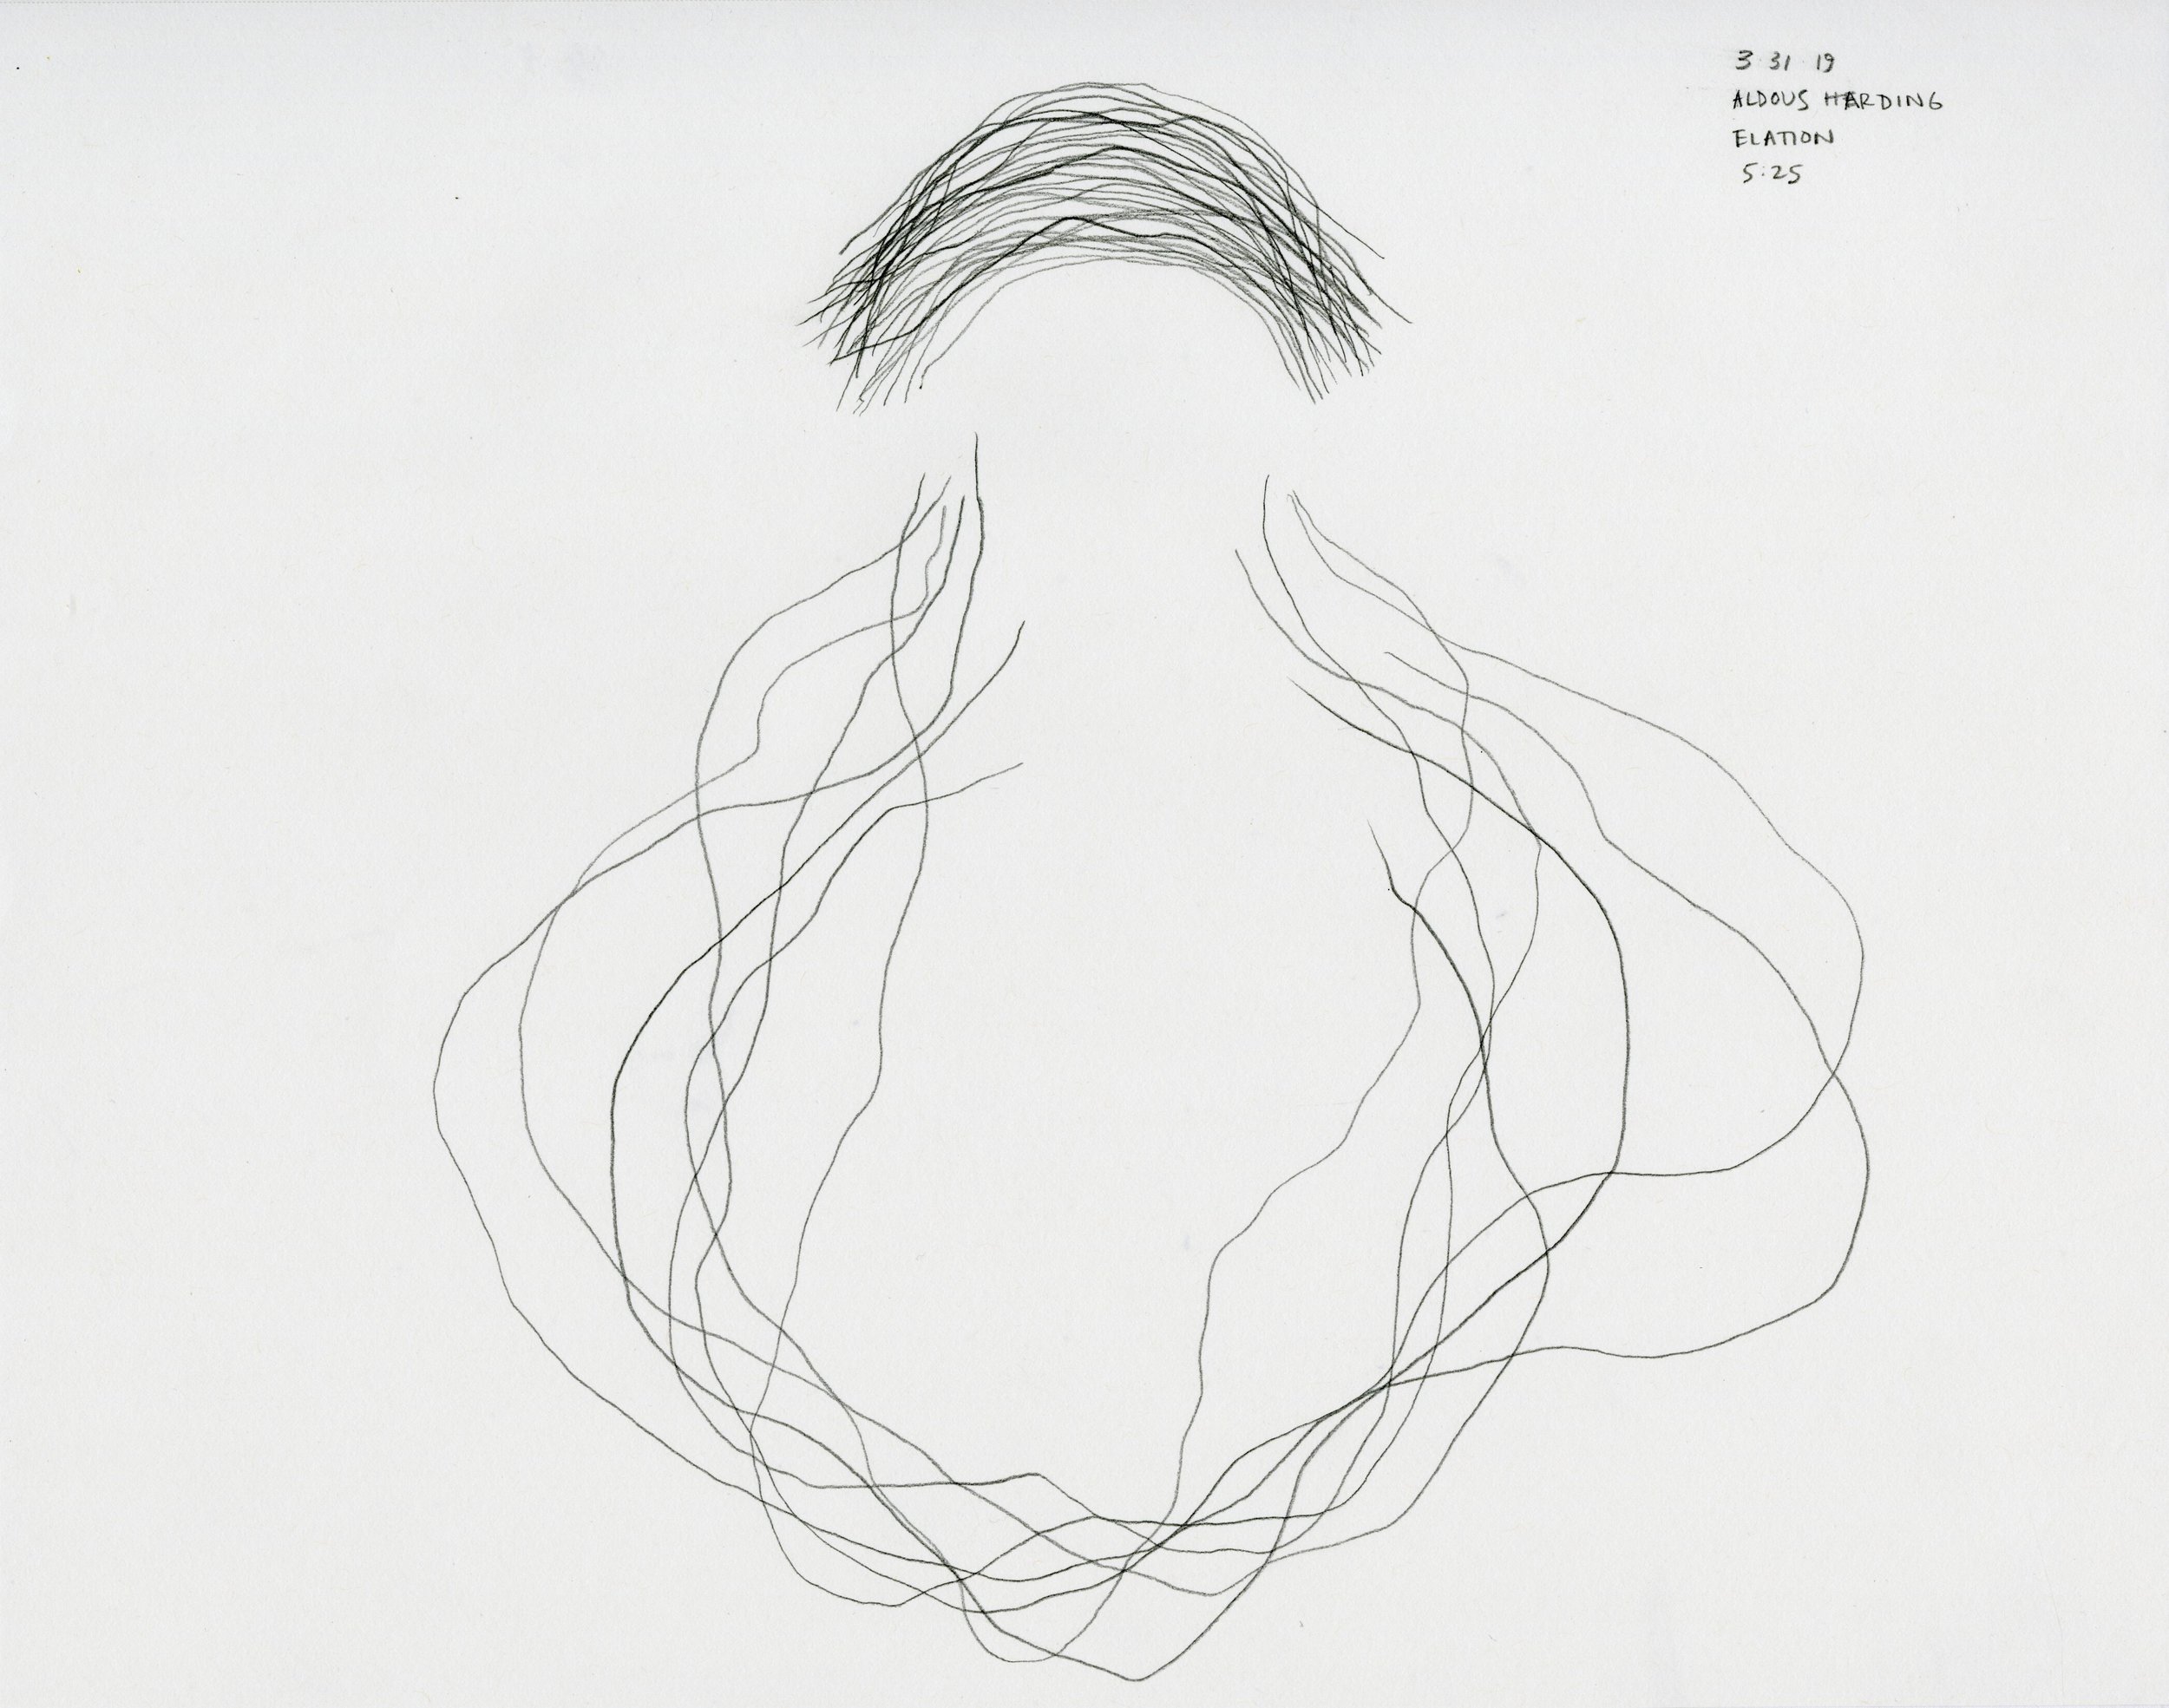   Music from Christopher, 2019   in collaboration with Christopher Jones  Cochlear Implant, youtube playlist, graphite, paper 